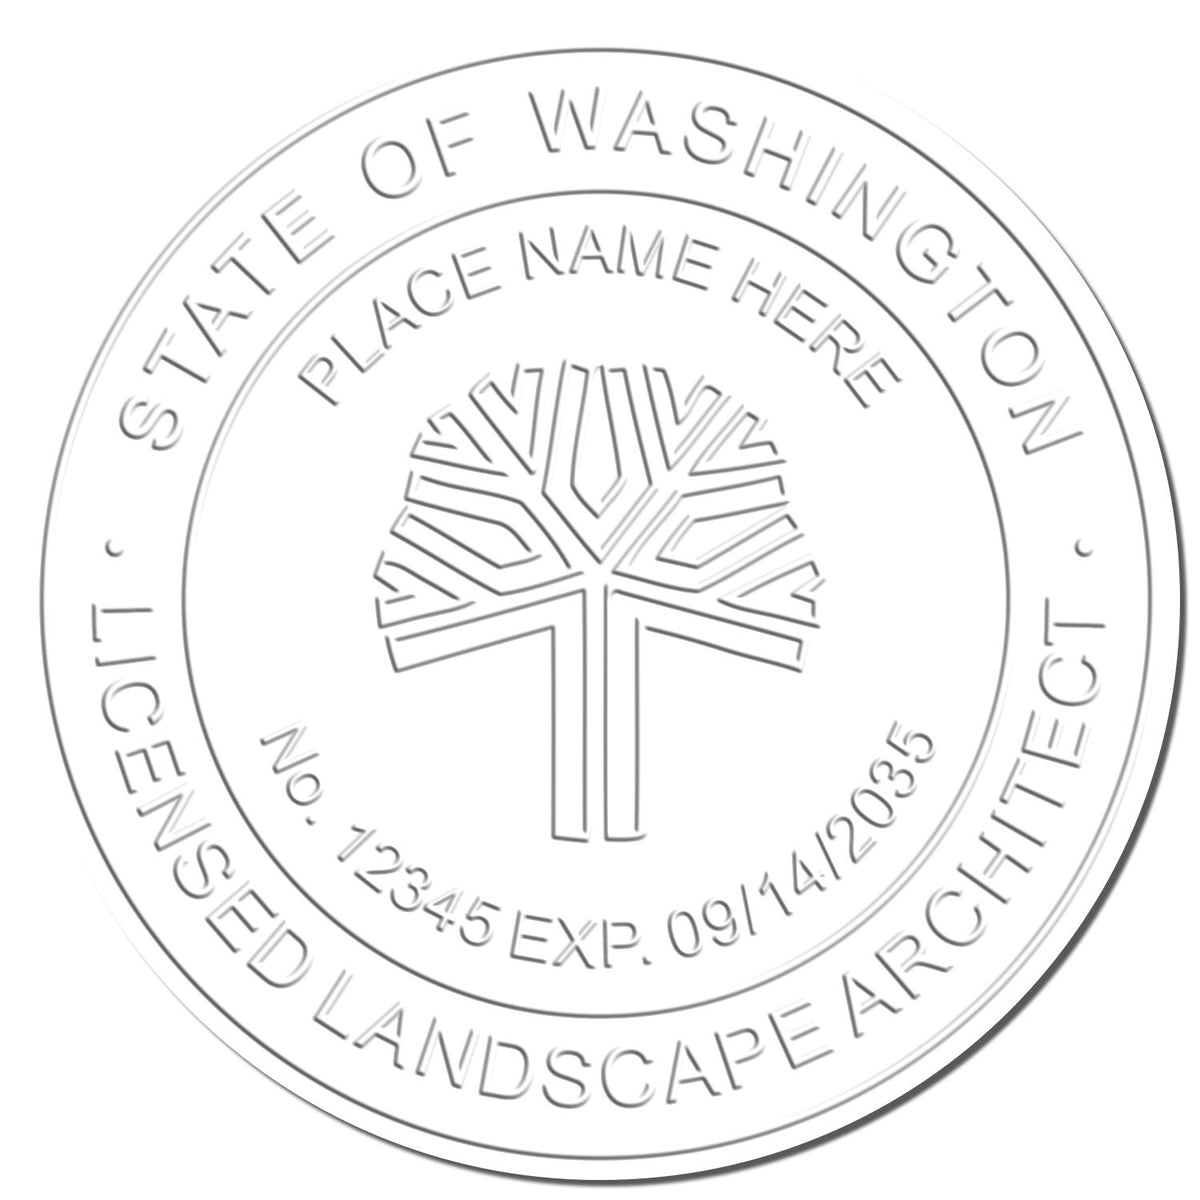 This paper is stamped with a sample imprint of the Gift Washington Landscape Architect Seal, signifying its quality and reliability.